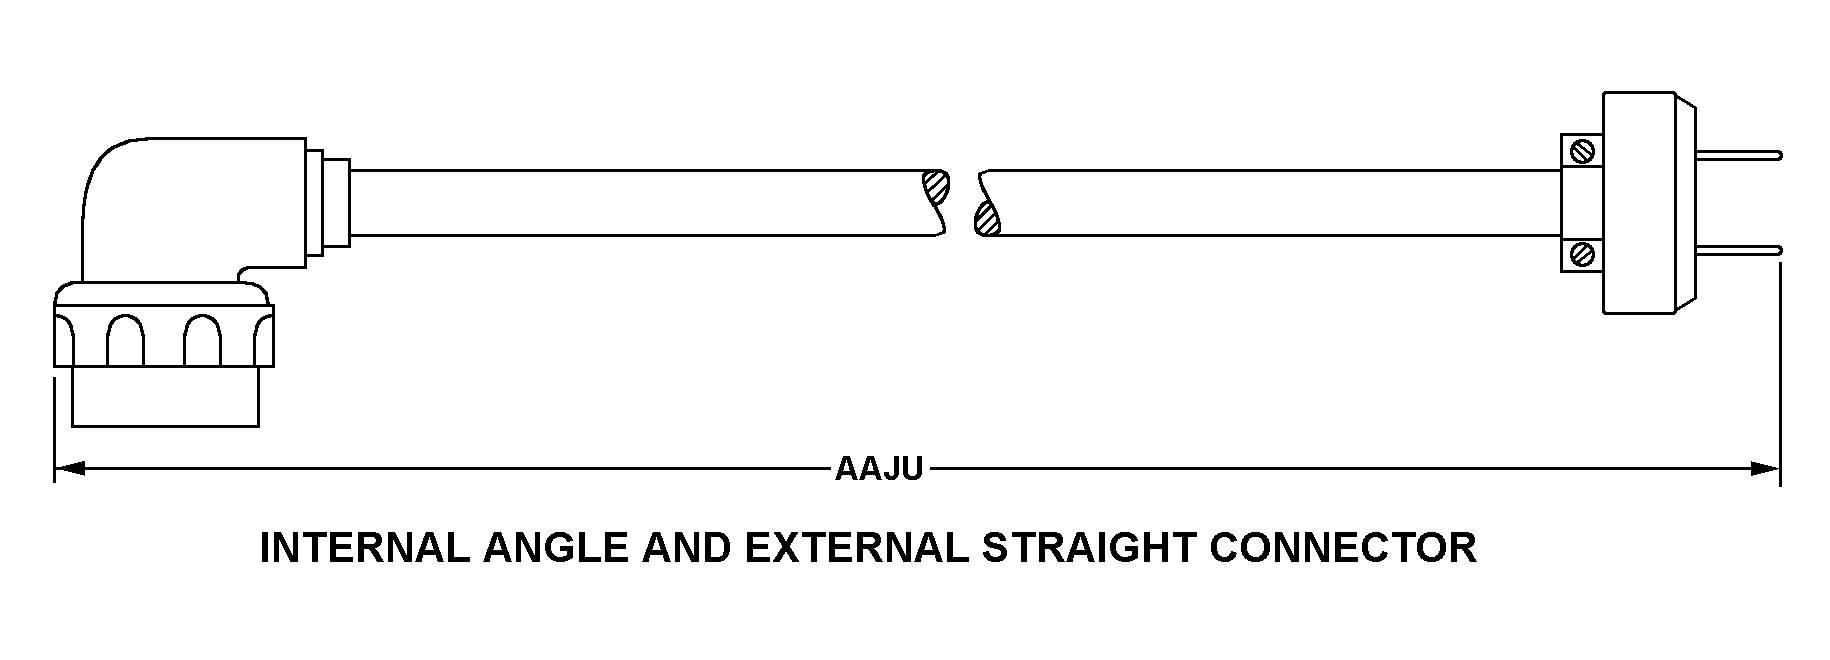 INTERNAL ANGLE AND EXTERNAL STRAIGHT CONNECTOR style nsn 5995-01-362-0185